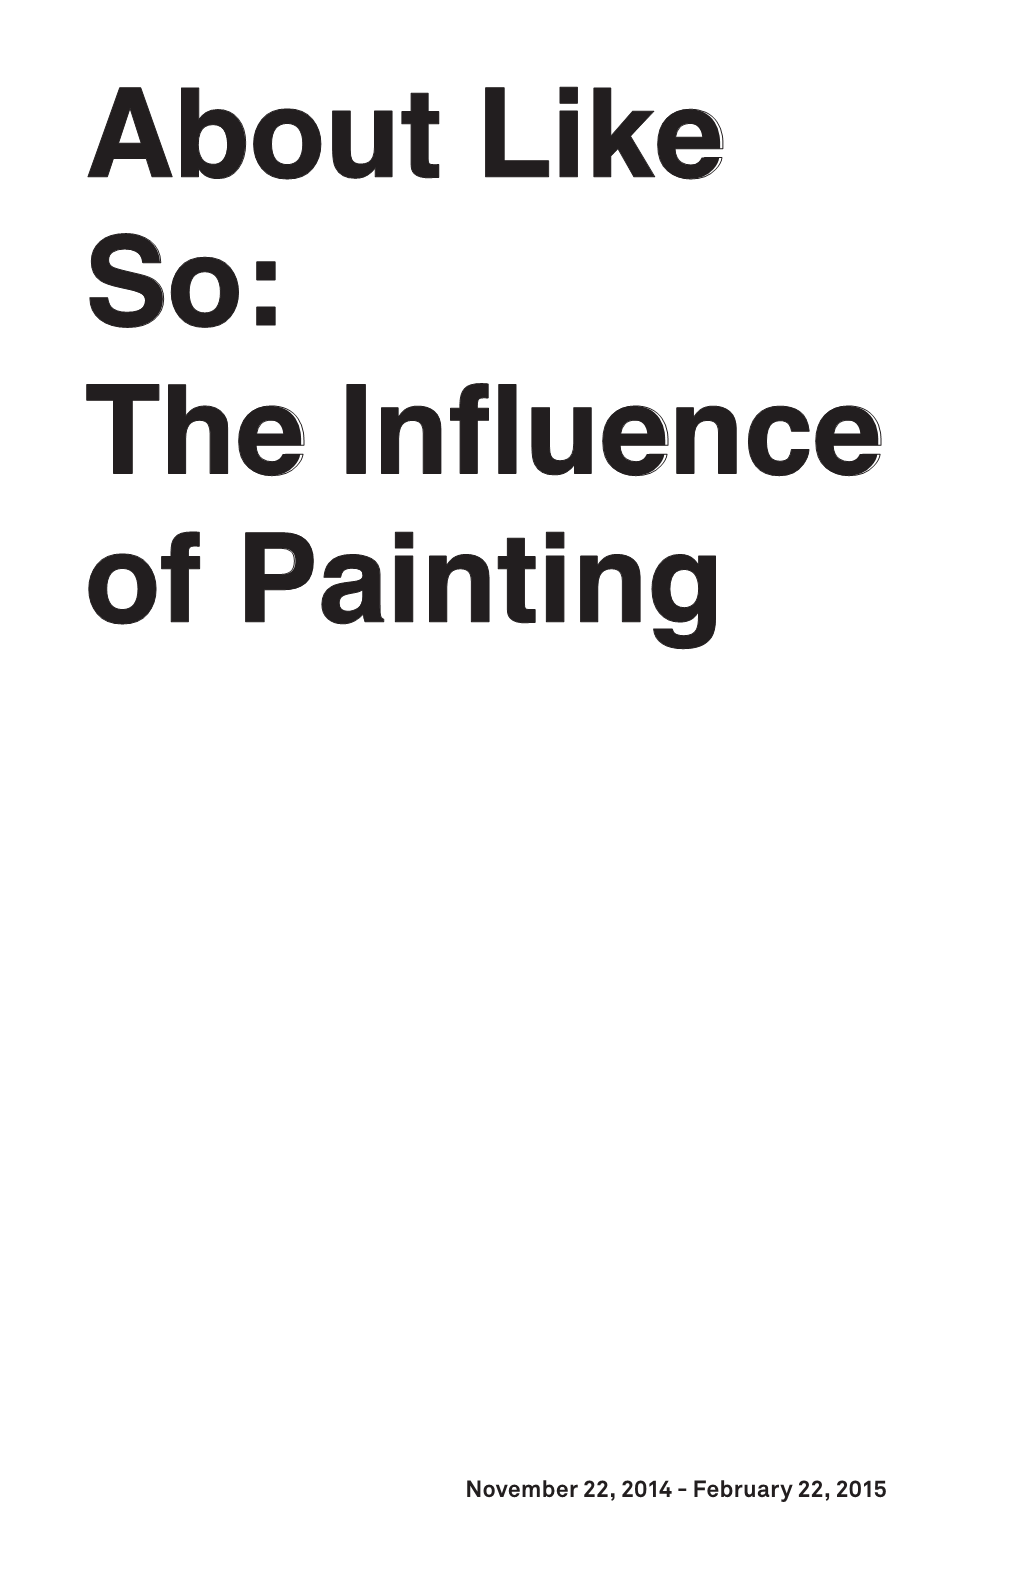 About Like So: the Influence of Painting